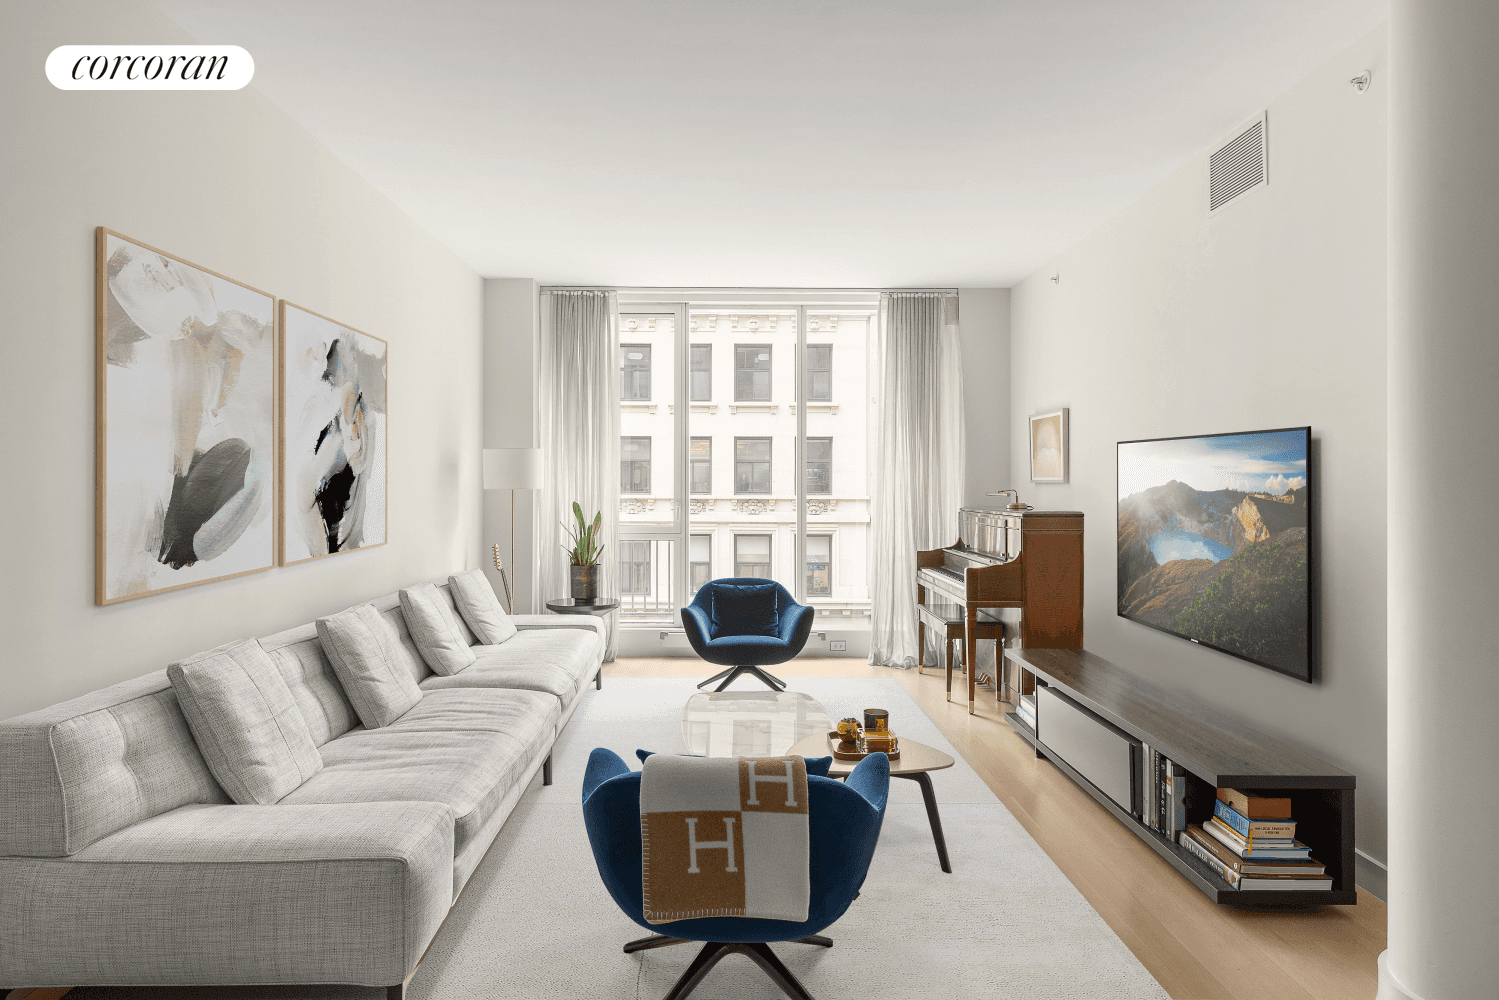 Welcome home to a stunning turn key three bedroom, three and a half bathroom loft style condominium in the center of Manhattan's Downtown NoMad neighborhood.